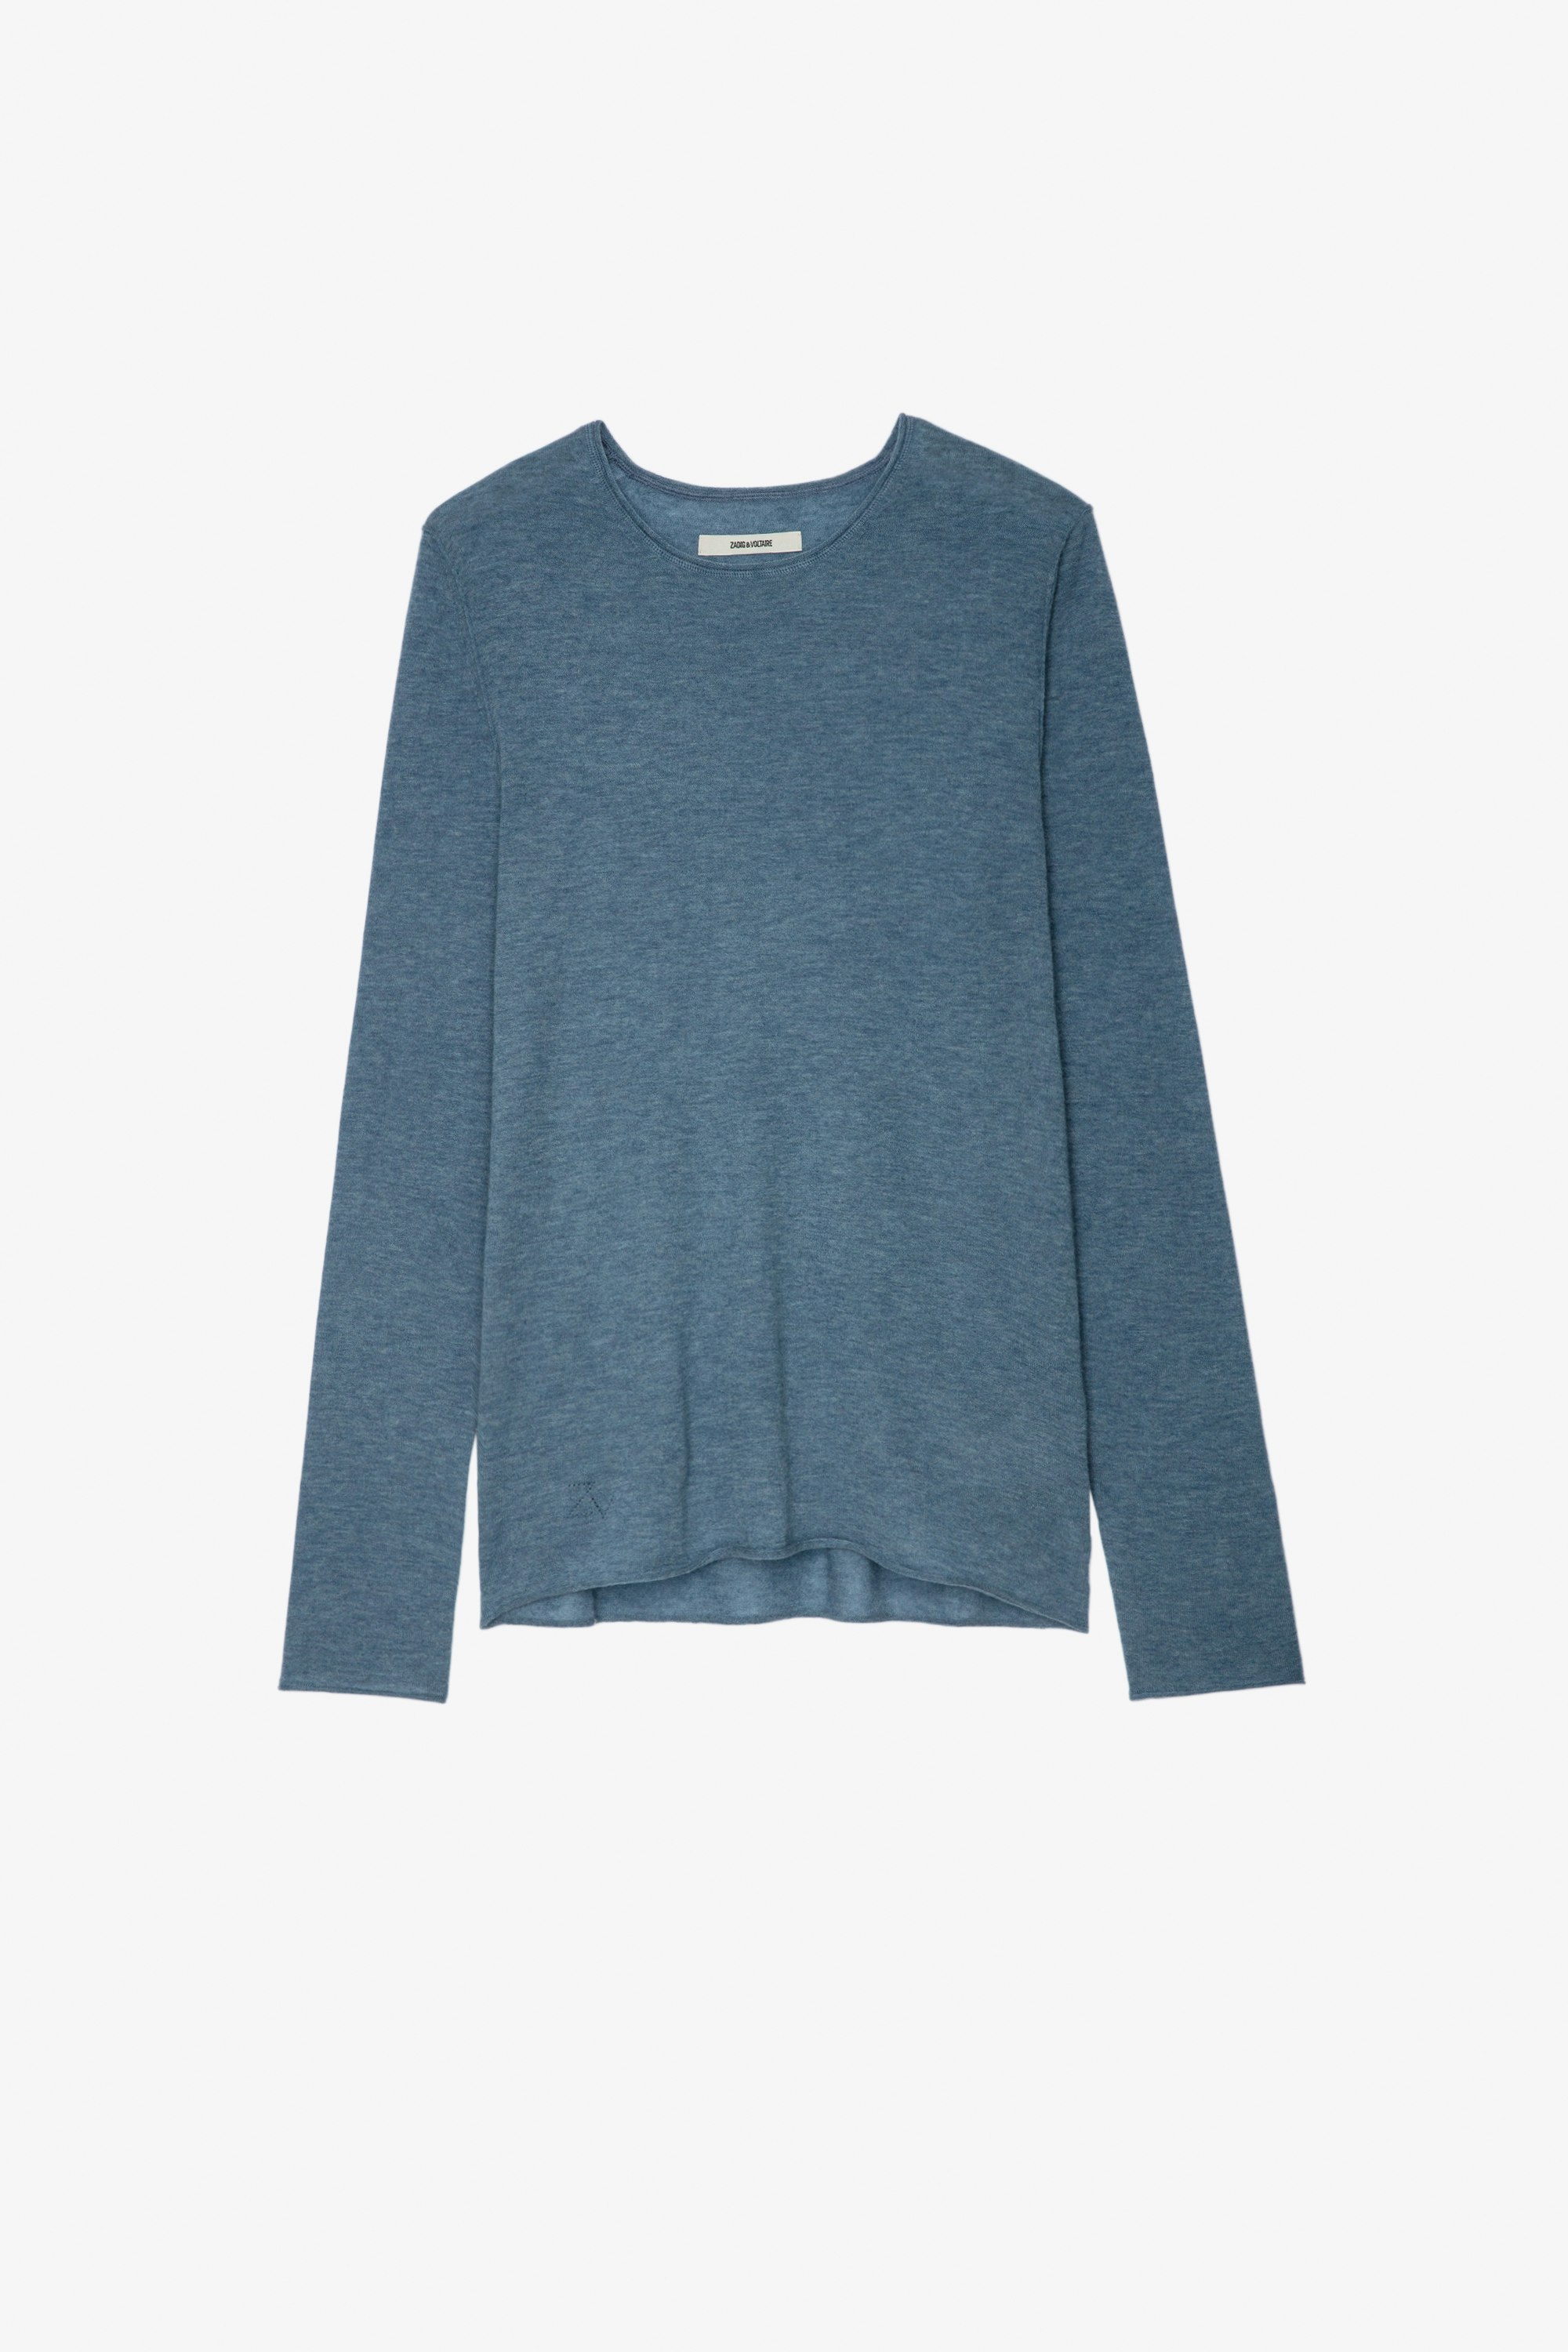 Teiss Cashmere Pullover Men's blue cashmere sweater with round neck and long sleeves